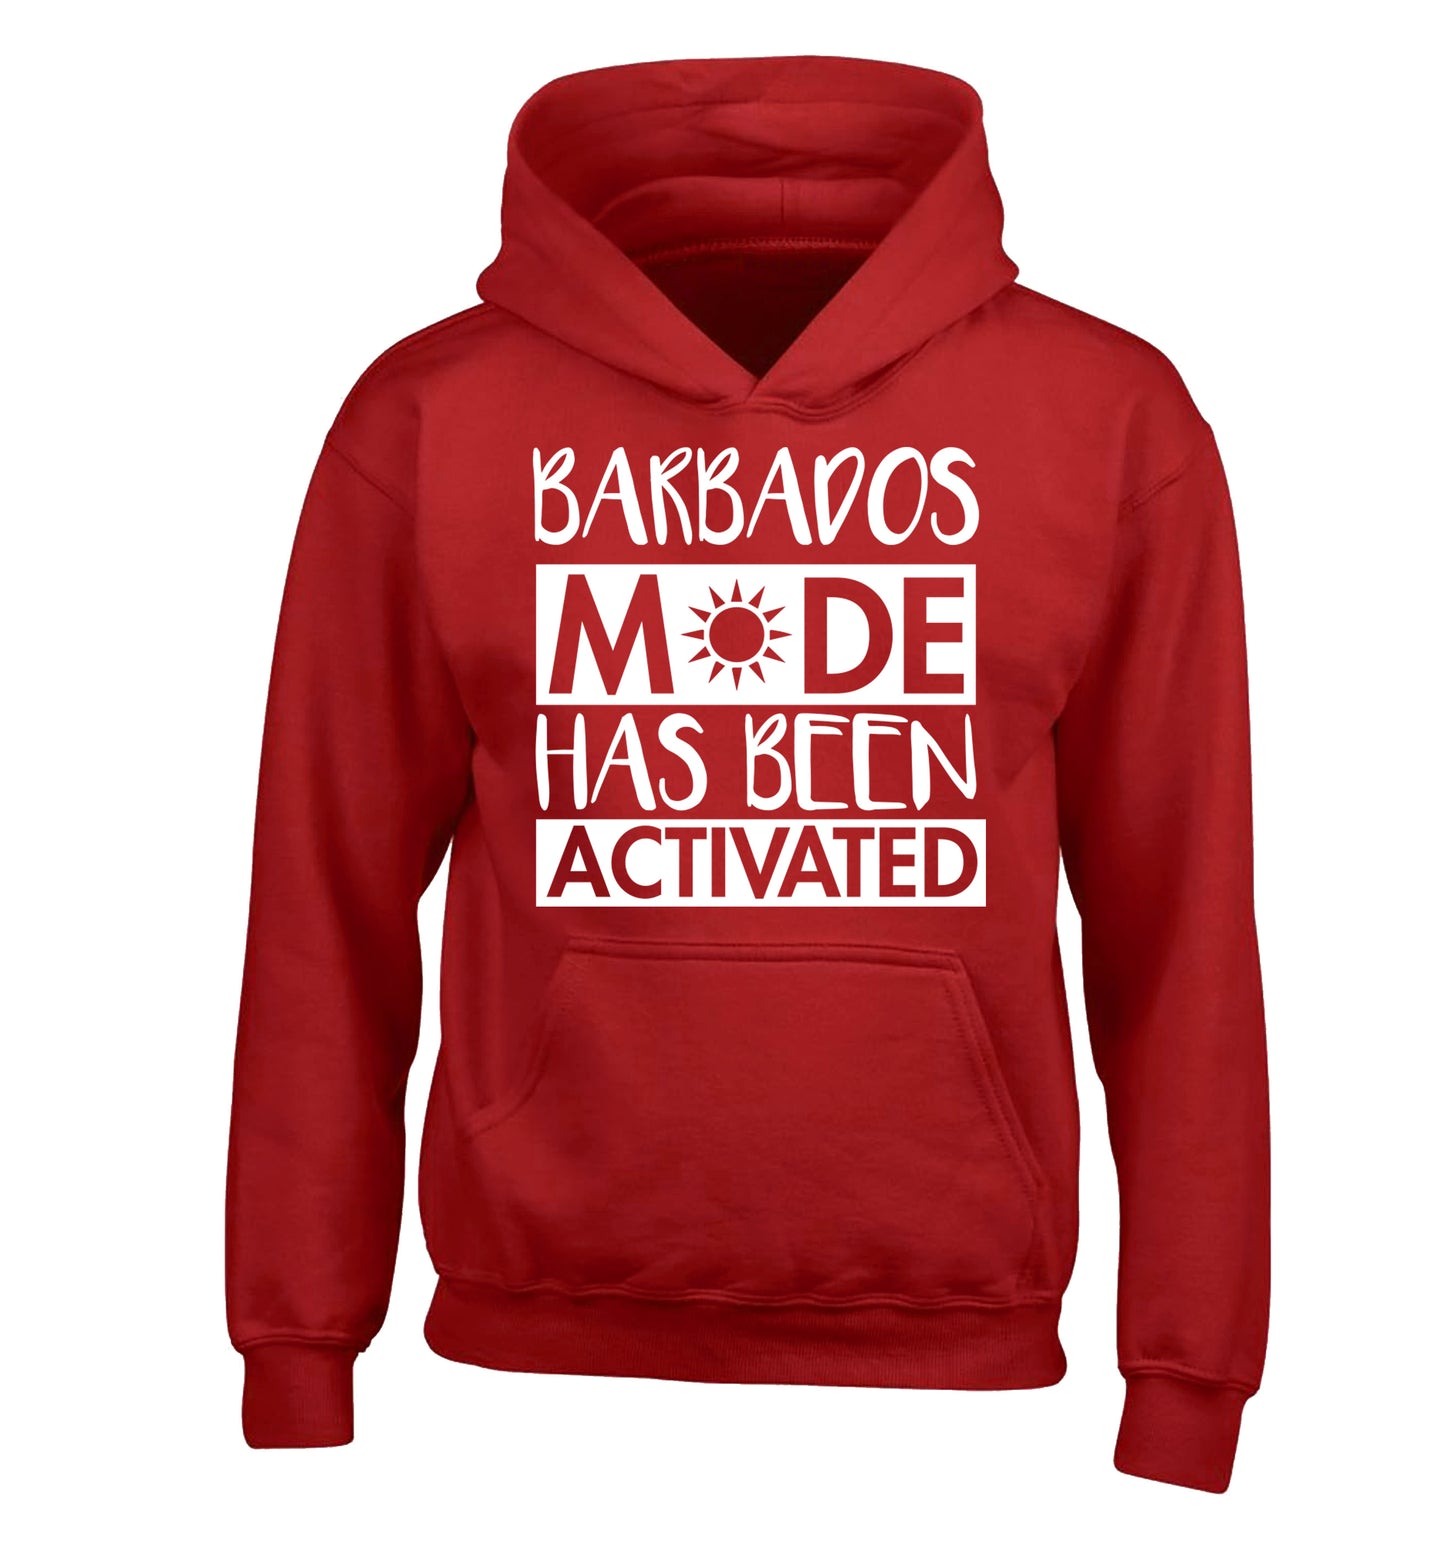 Barbados mode has been activated children's red hoodie 12-13 Years